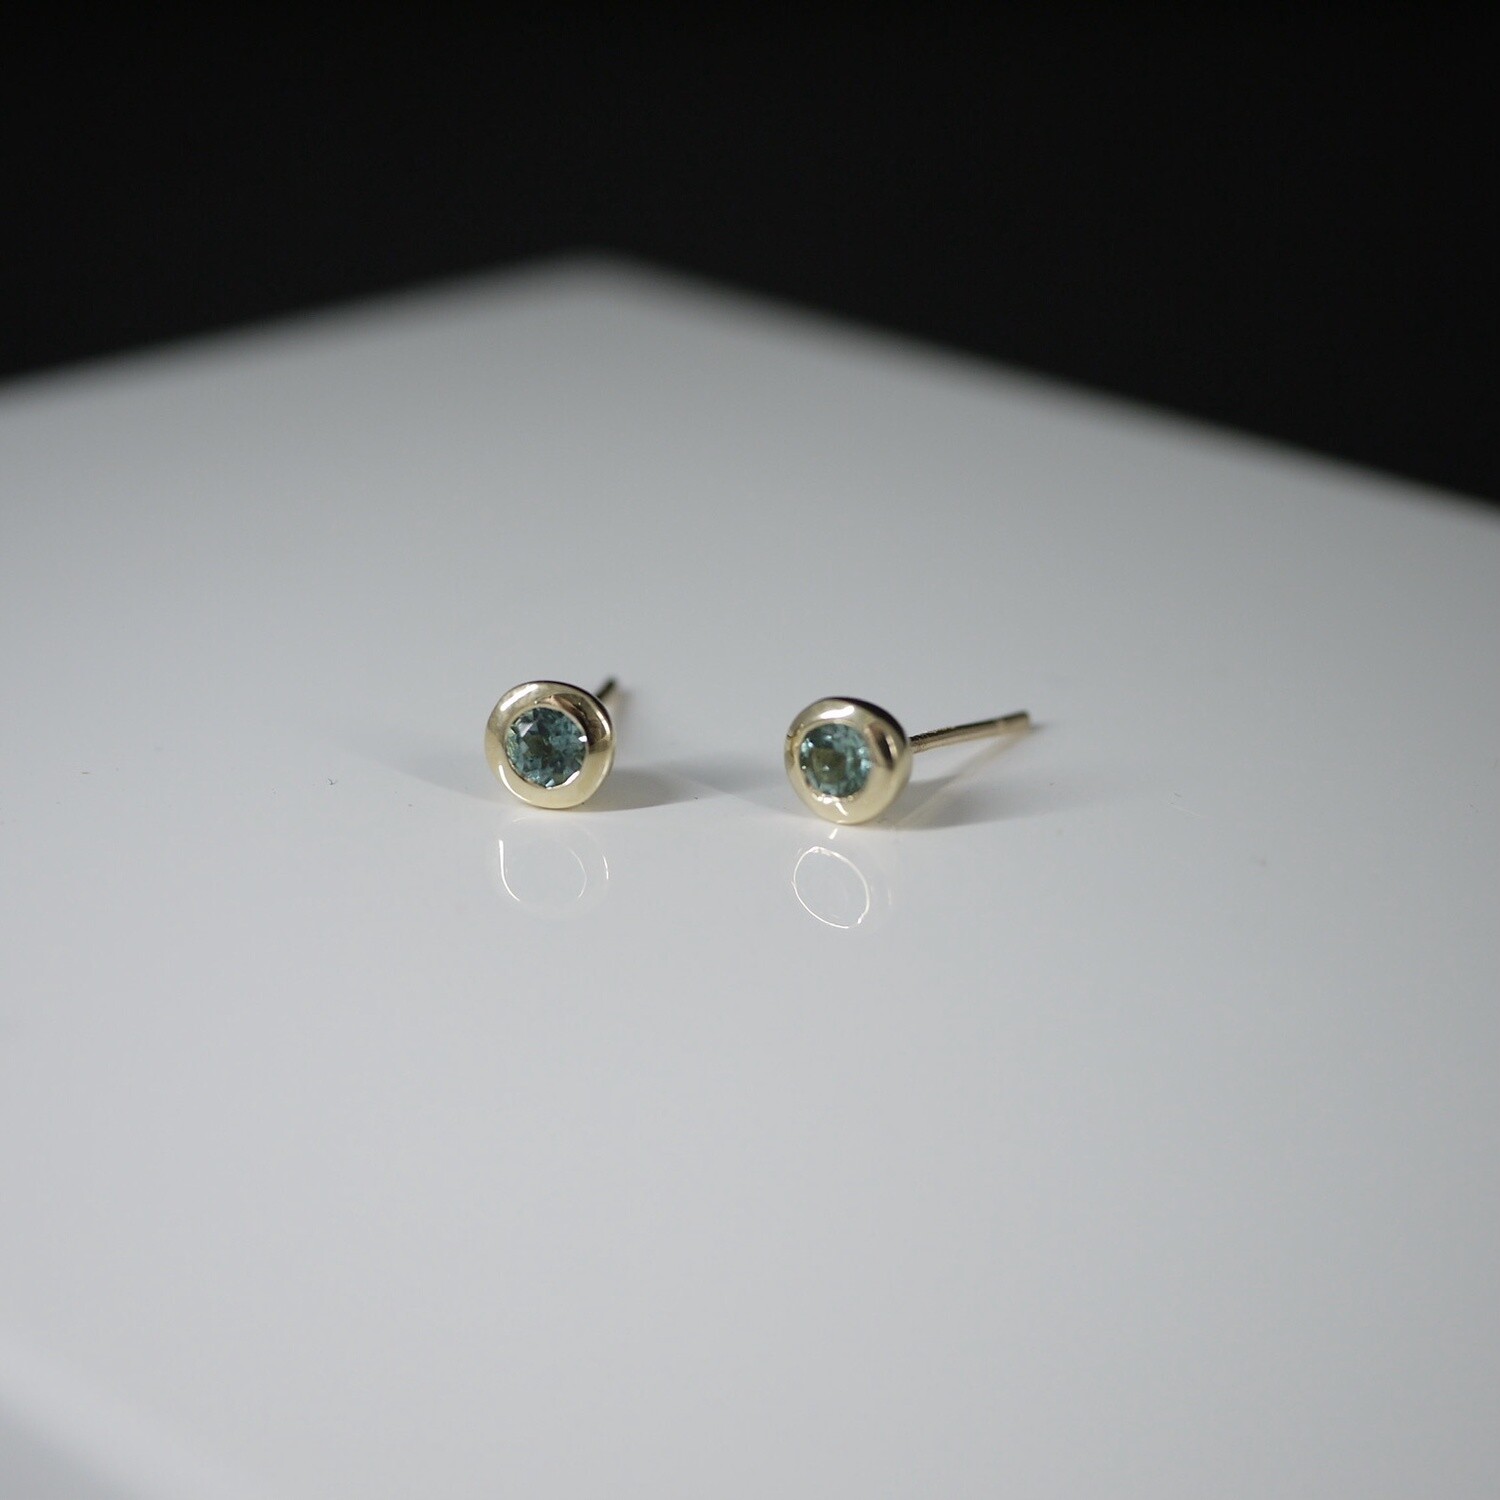 Juicy studs in yellow gold